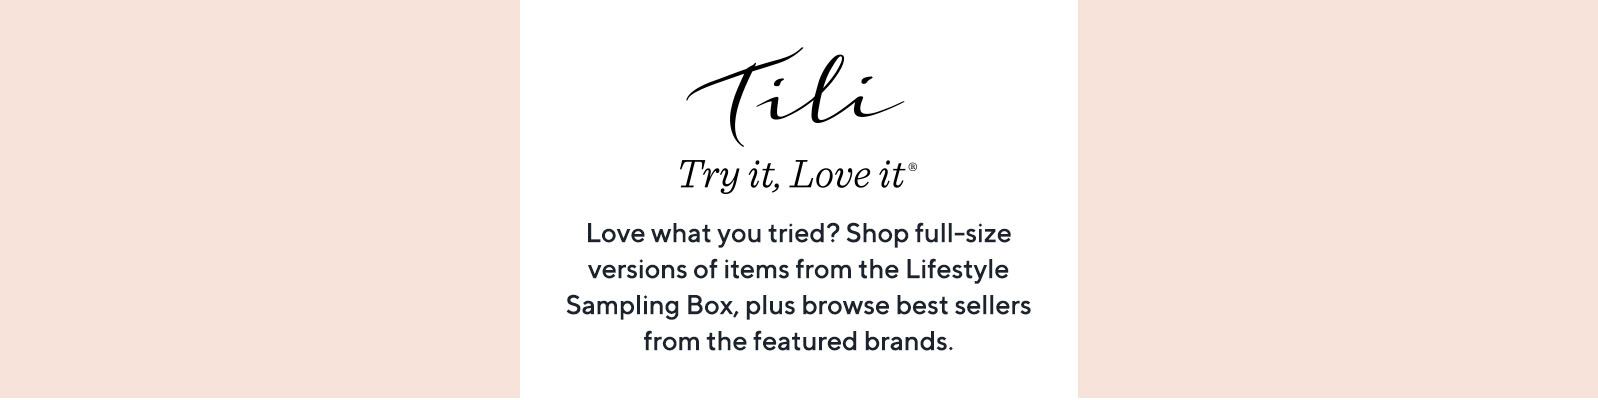 TILI Try it, Love it Love what you tried? Shop full-size versions of items from the Lifestyle Sampling Box, plus browse best sellers from the featured brands.